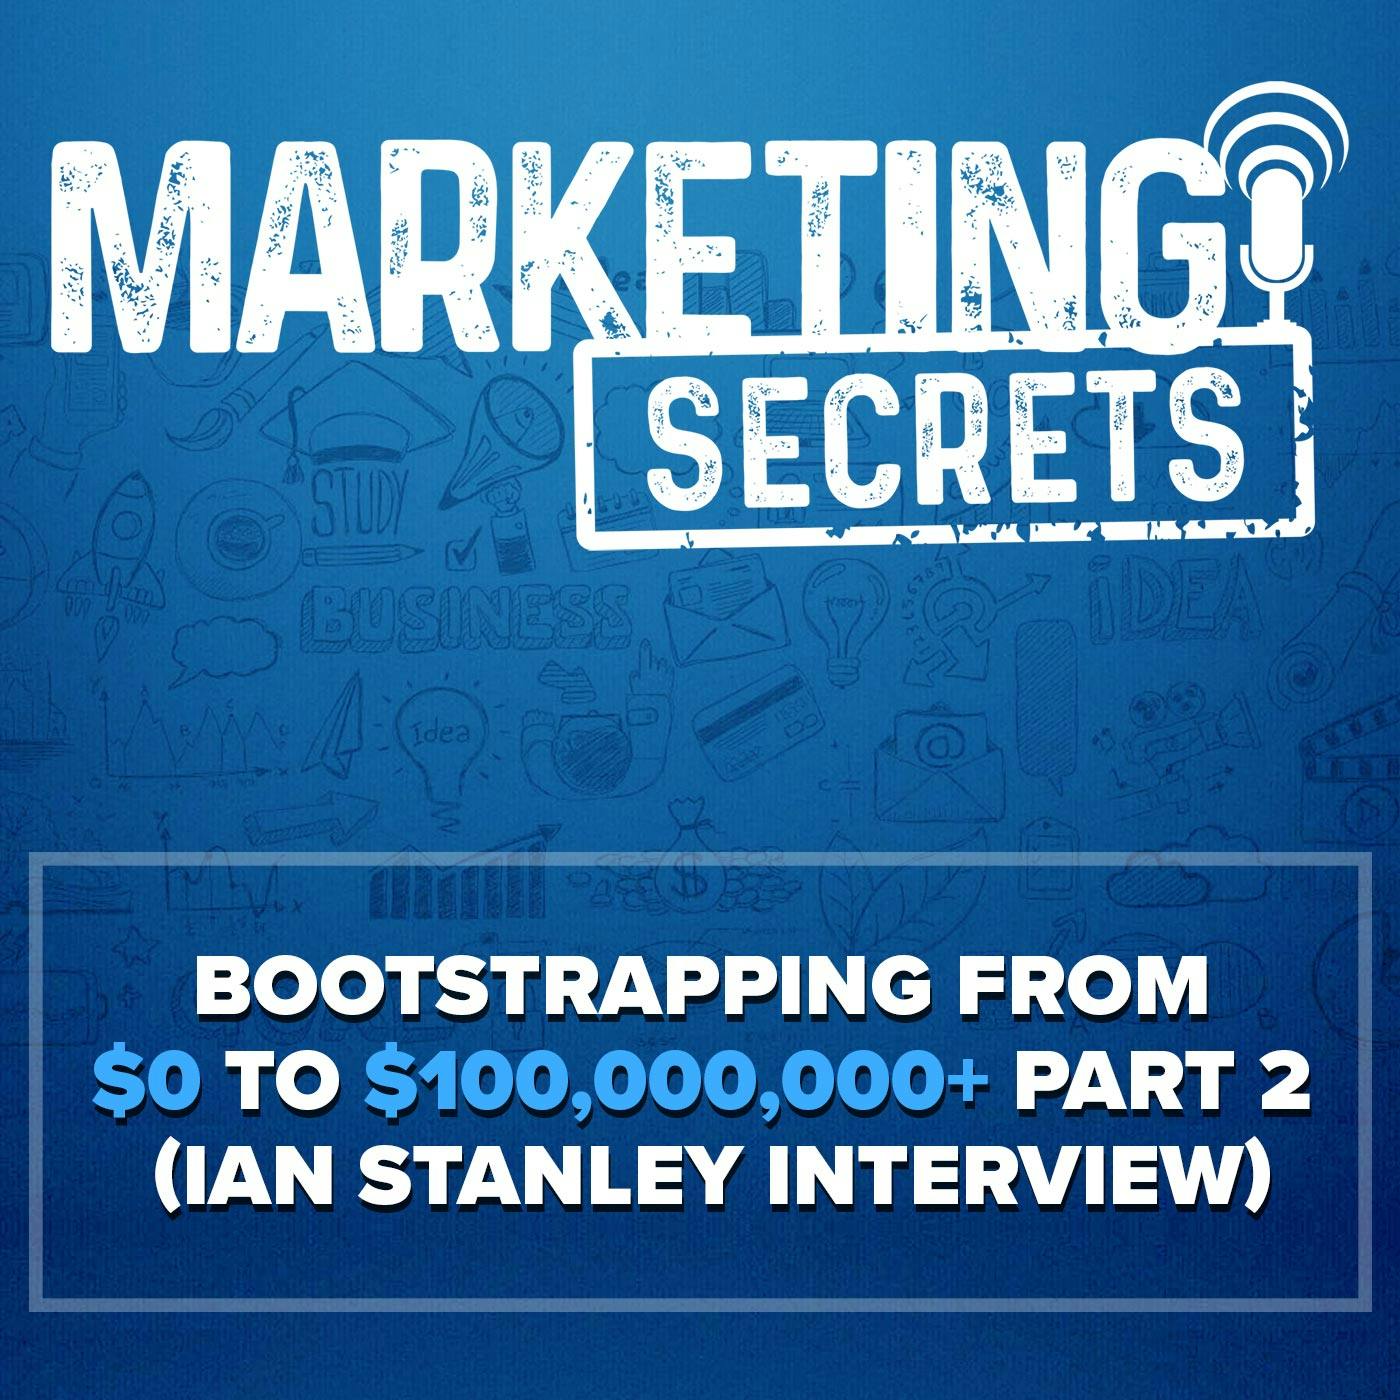 Bootstrapping from $0 to $100,000,000+ Part 2 (Ian Stanley Interview)